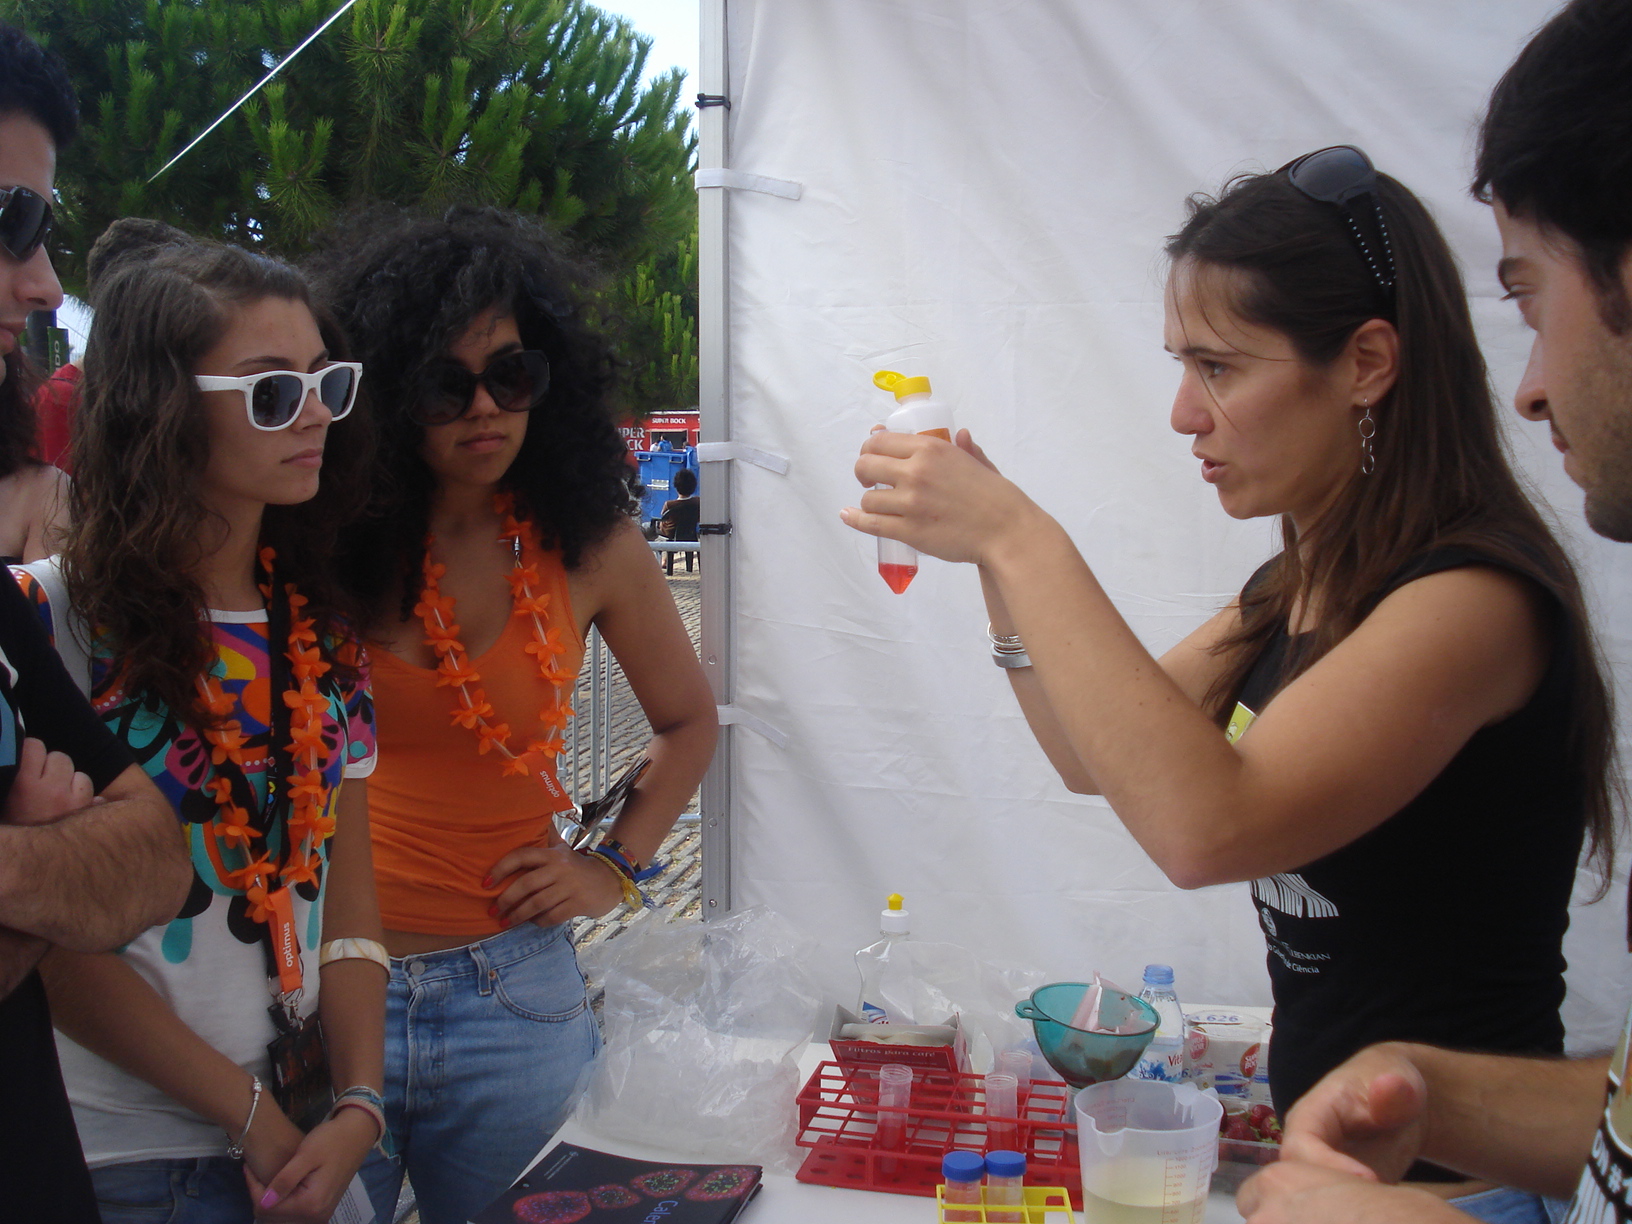 DNA extraction at the IGC stand